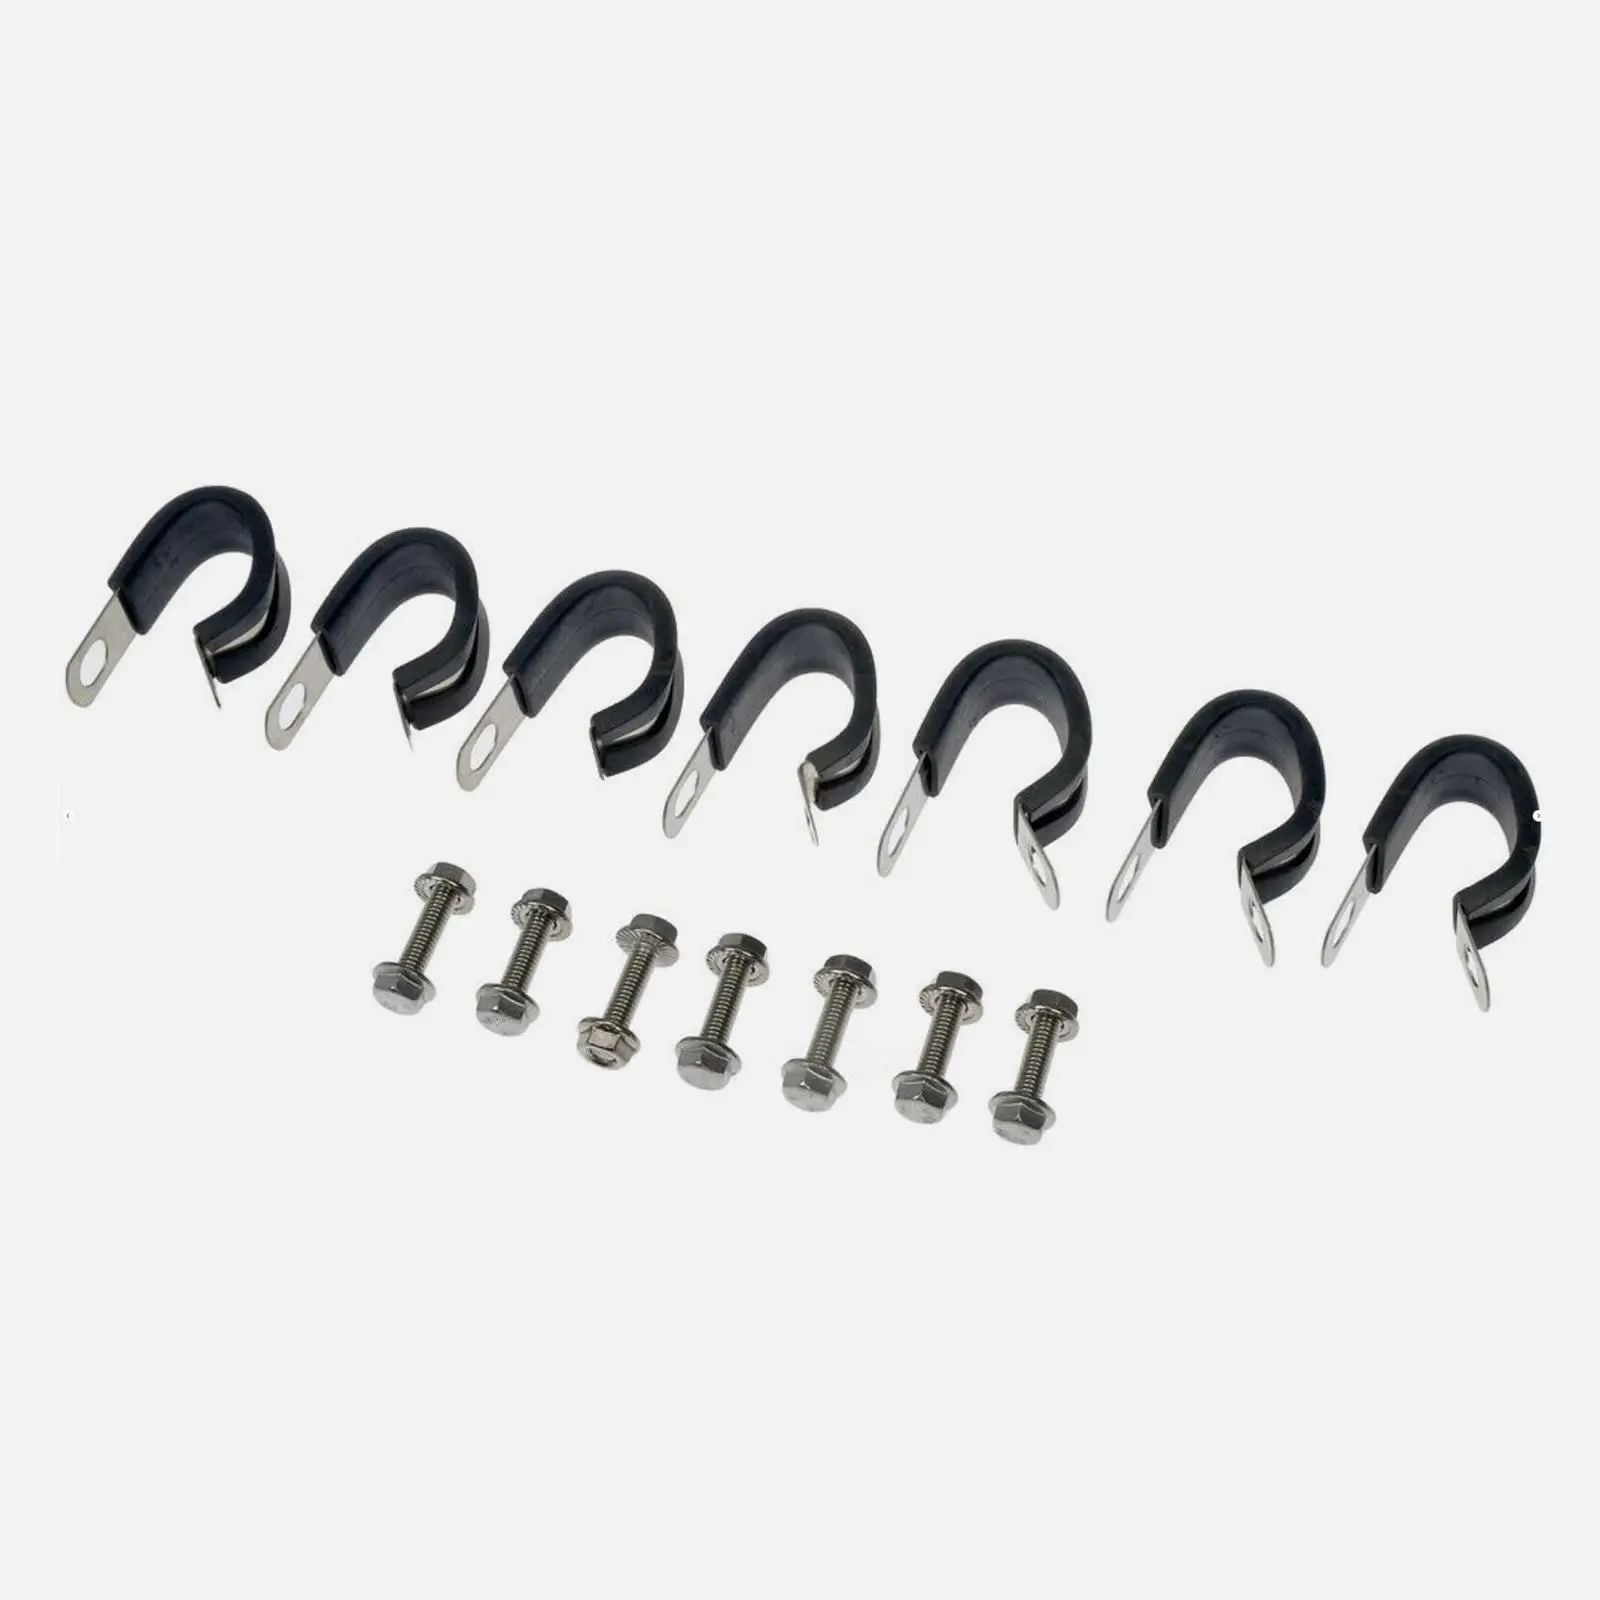 Fuel Line 819-840 Spare Parts Easy to Install Repair Parts Flexible Steel Braided Professional Replacement for GMC Sierra